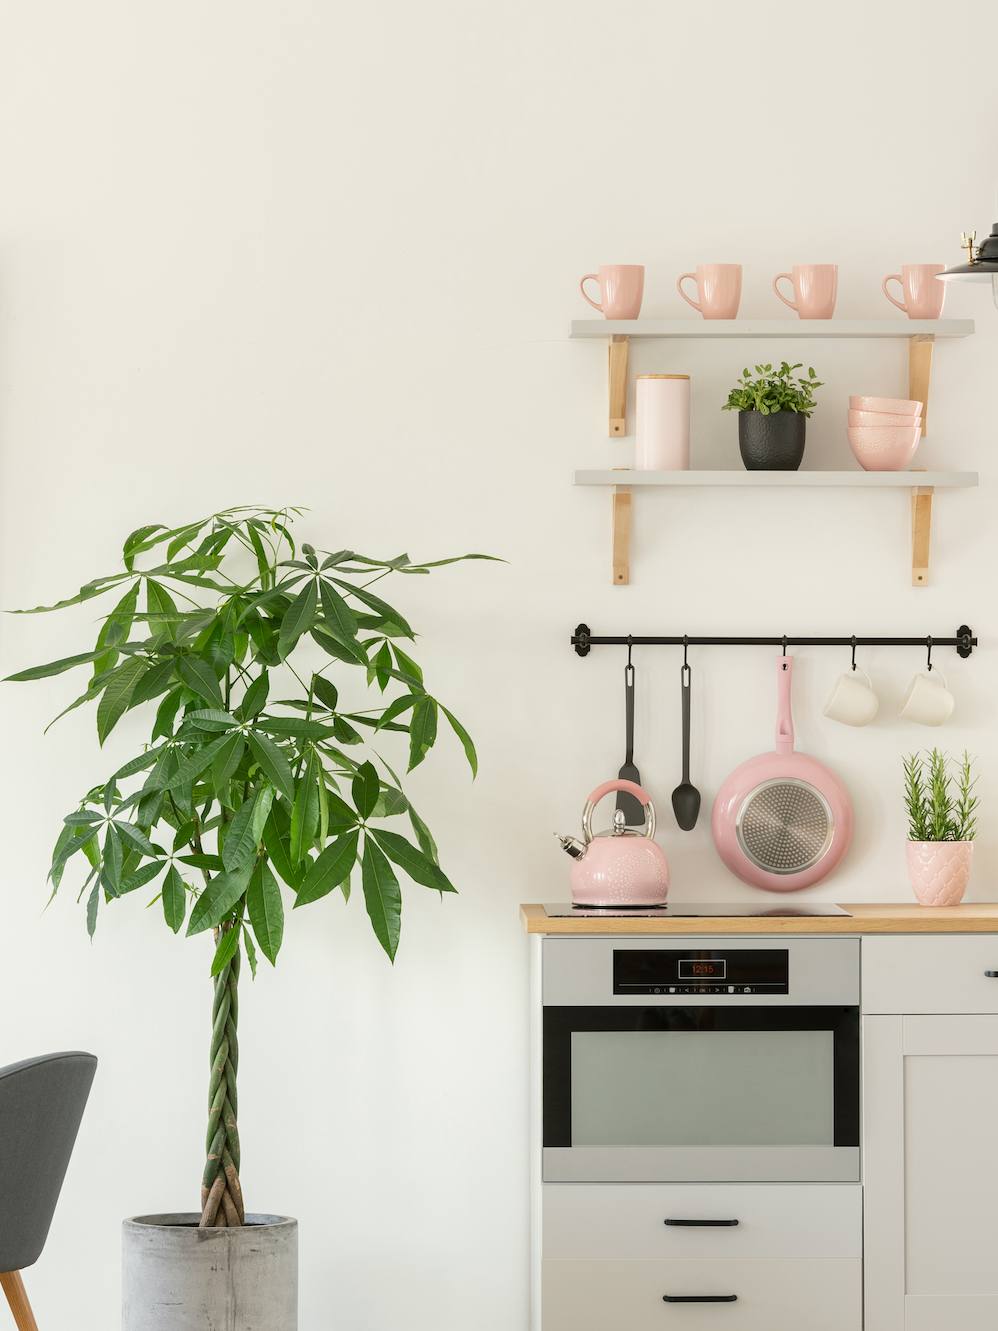 Fresh plant standing next to wooden dining table with chairs in real photo of bright kitchen interior with pastel pink utensils and simple poster on wall